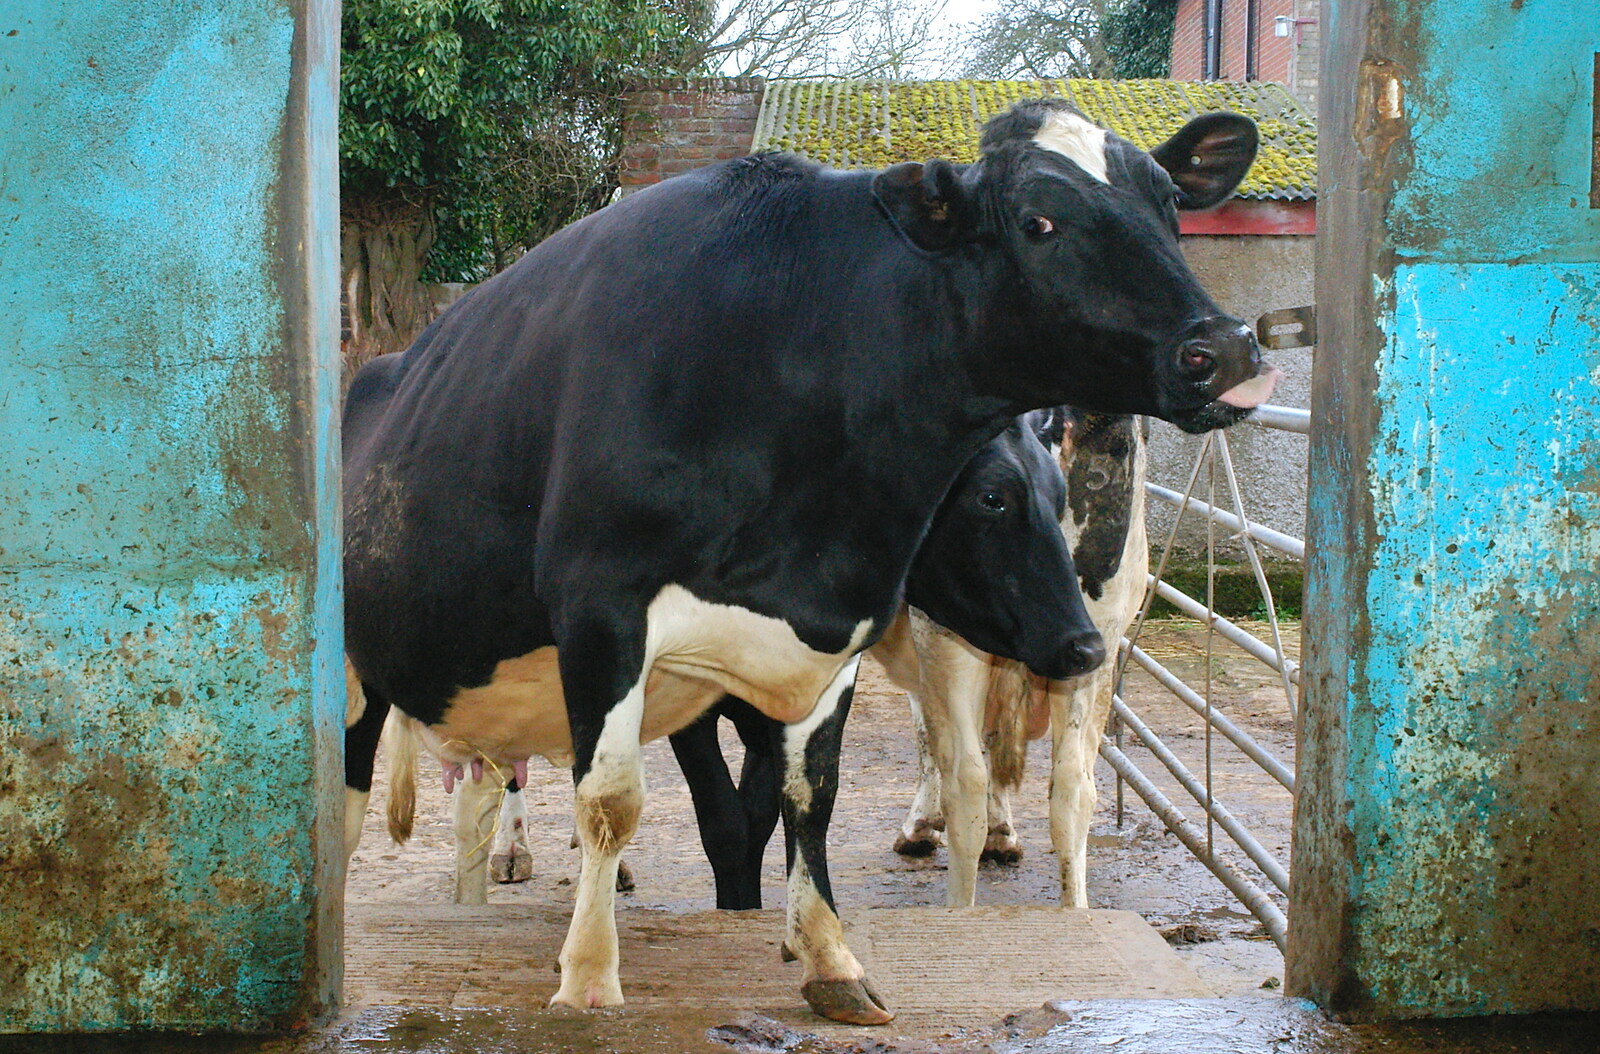 A cow on the steps from Wavy and the Milking Room, Dairy Farm, Thrandeston, Suffolk - 28th March 2005